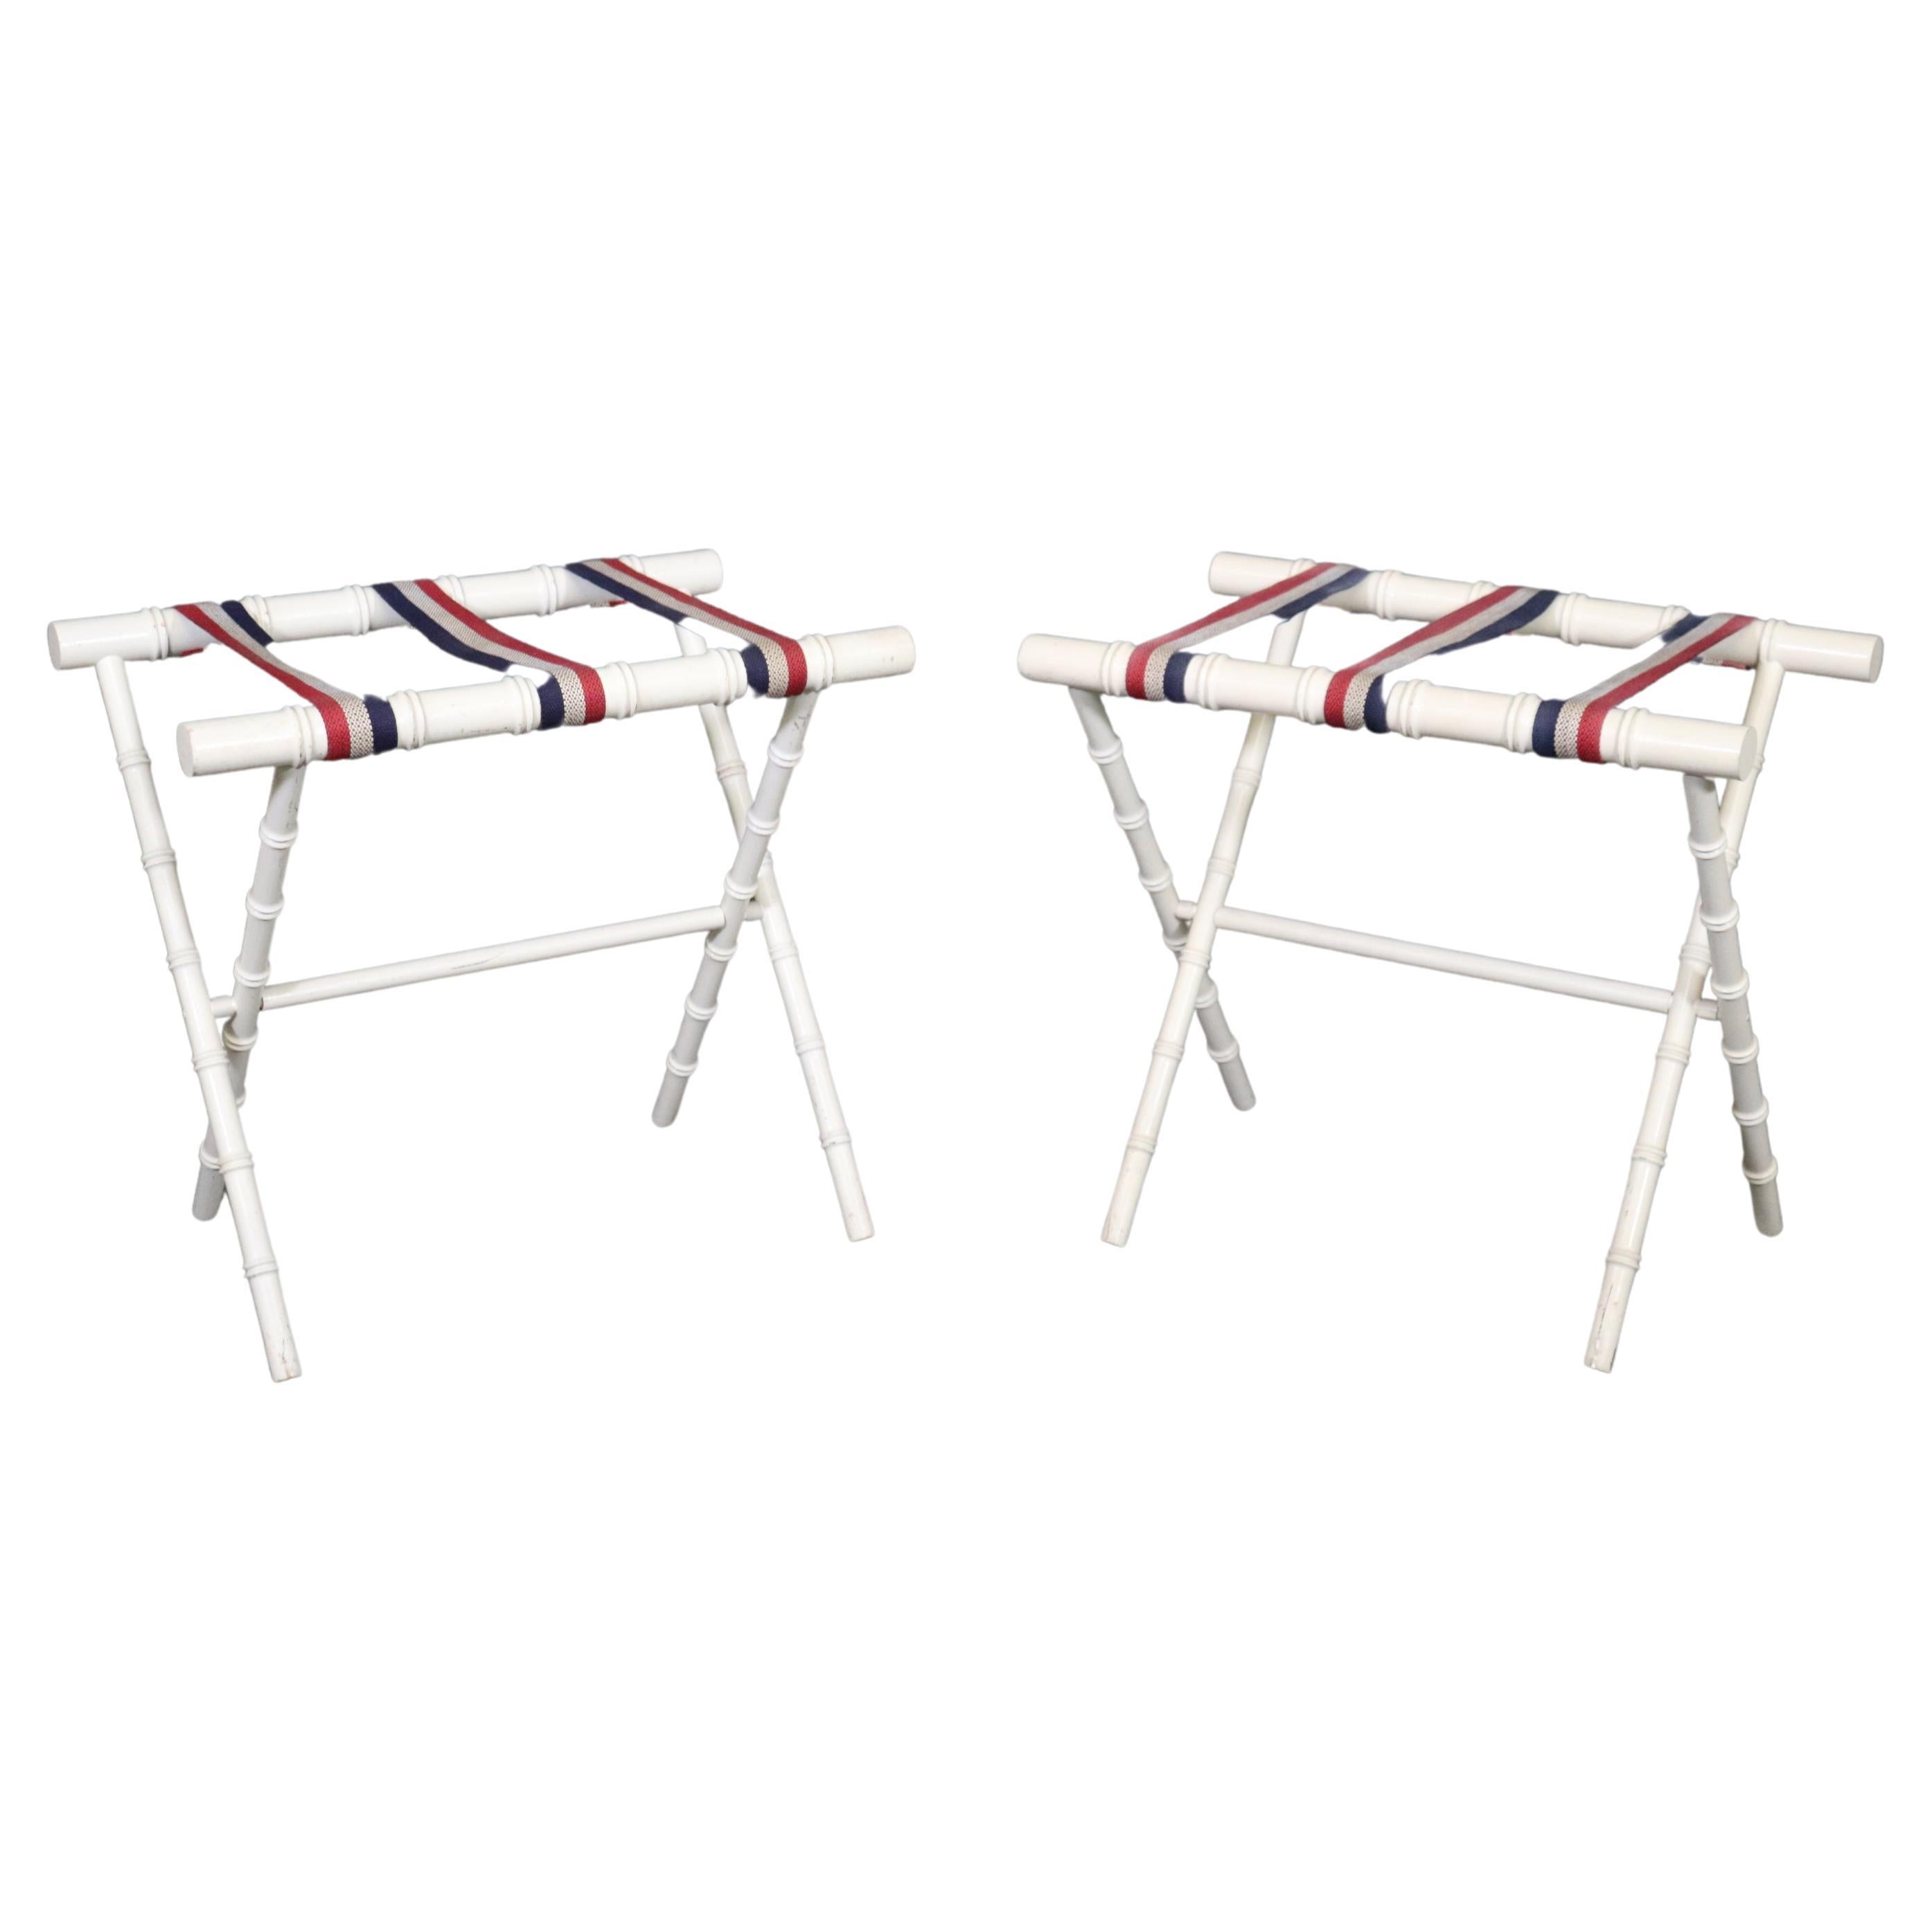 Pair Creme Paint Decorated Faux Bamboo Luggage Racks in Manner of Jacques Adnet